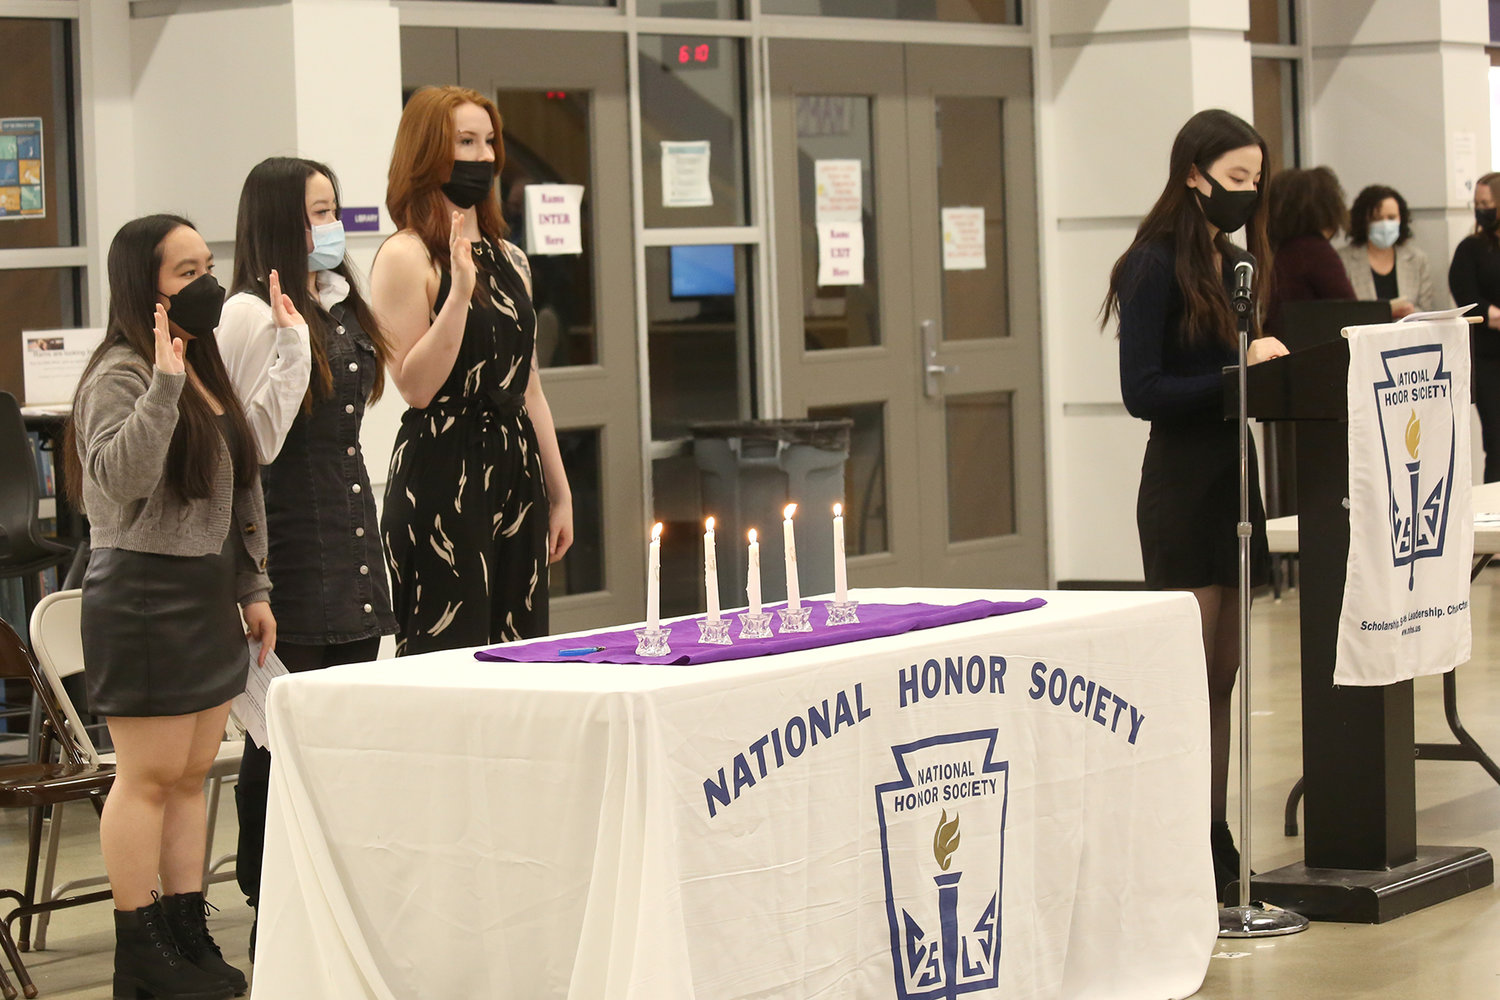 Honor Society officers lead the inductees during their pledge.